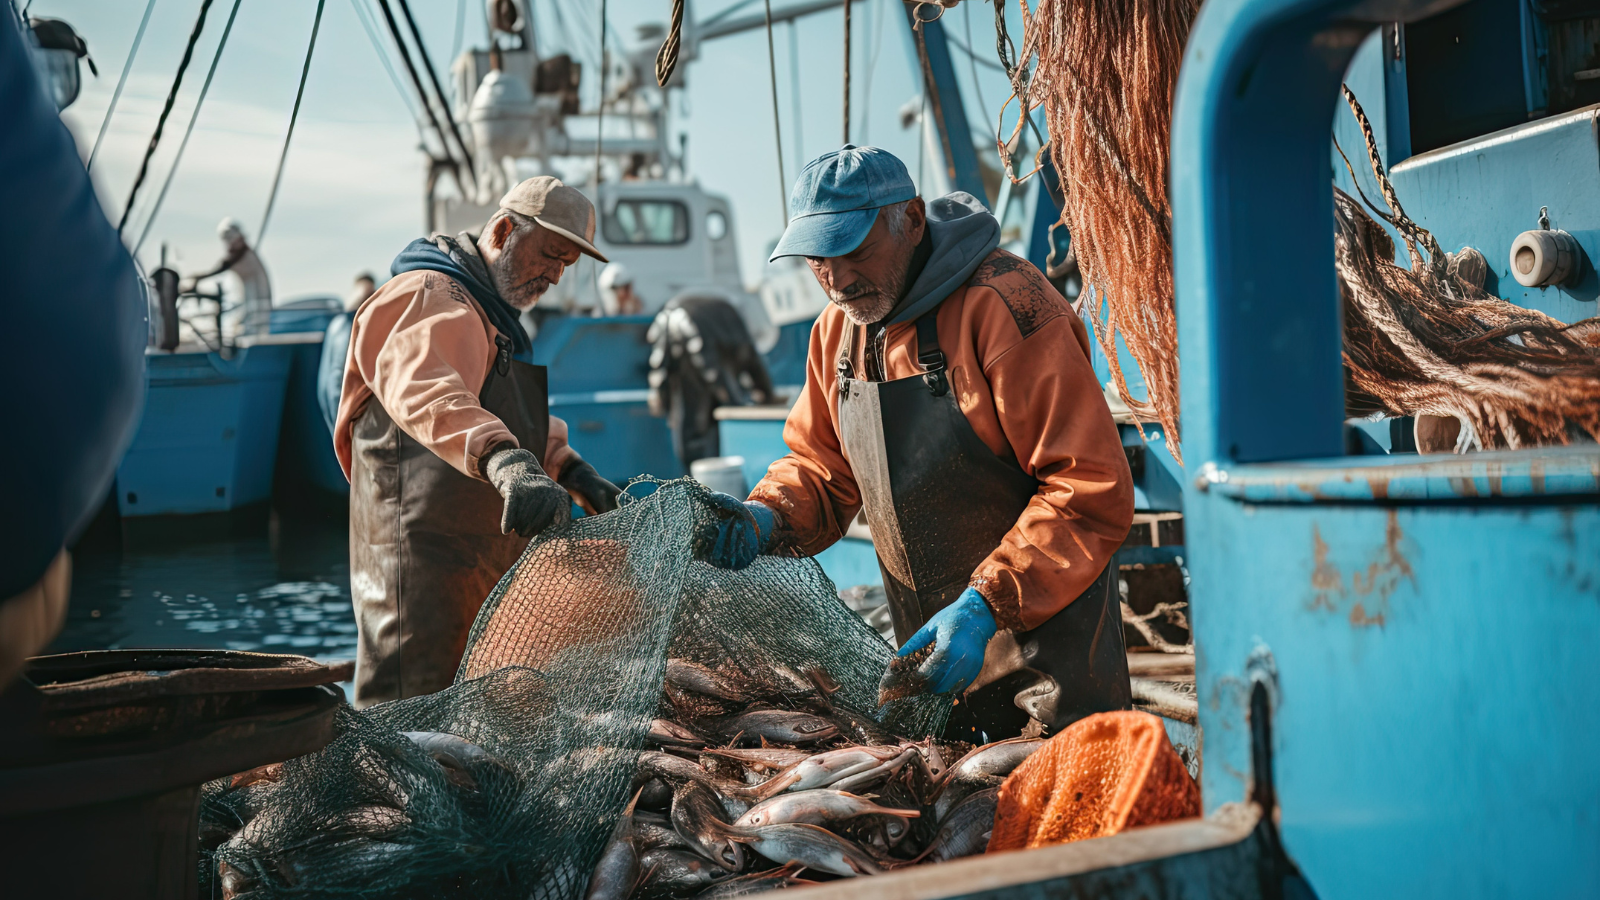 Navigating the waters of the US healthcare system: improving the biopsychosocial health of fishing industry workers